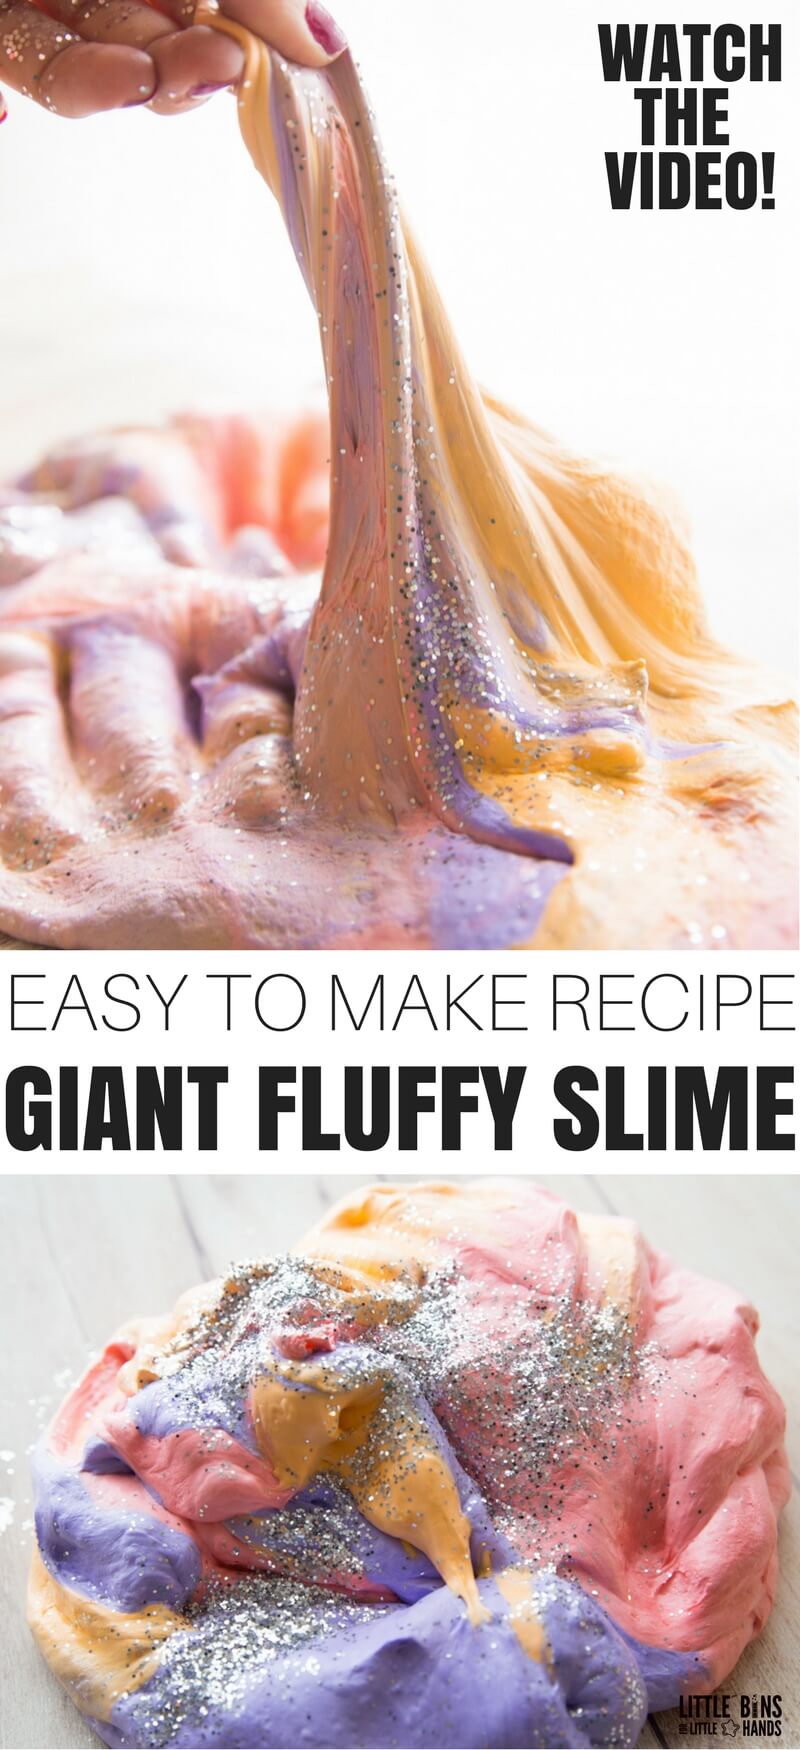 Making one batch of fluffy slime is incredibly awesome right?! But if you really want to wow the masses, and by masses I mean your favorite kids, why not learn how to make giant fluffy slime recipe ideas too. There's a couple ways to go about it, and we have a fun video to check out below. Making homemade slime any way you like it, it's a great science and sensory play activity for those kiddos.